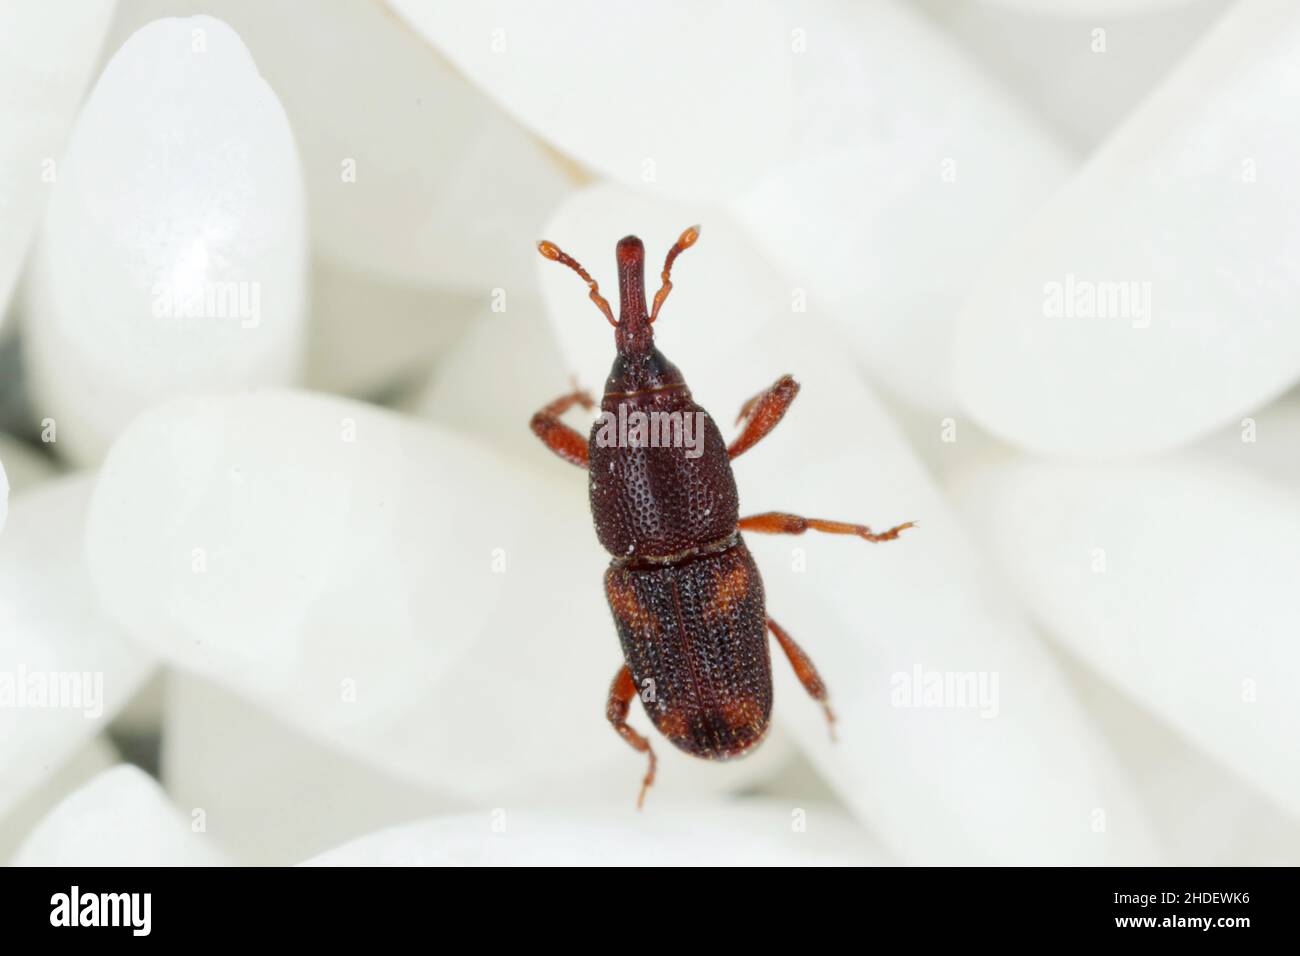 Close up of adults rice weevil (Sitophilus oryzae) on rice grains. Stock Photo